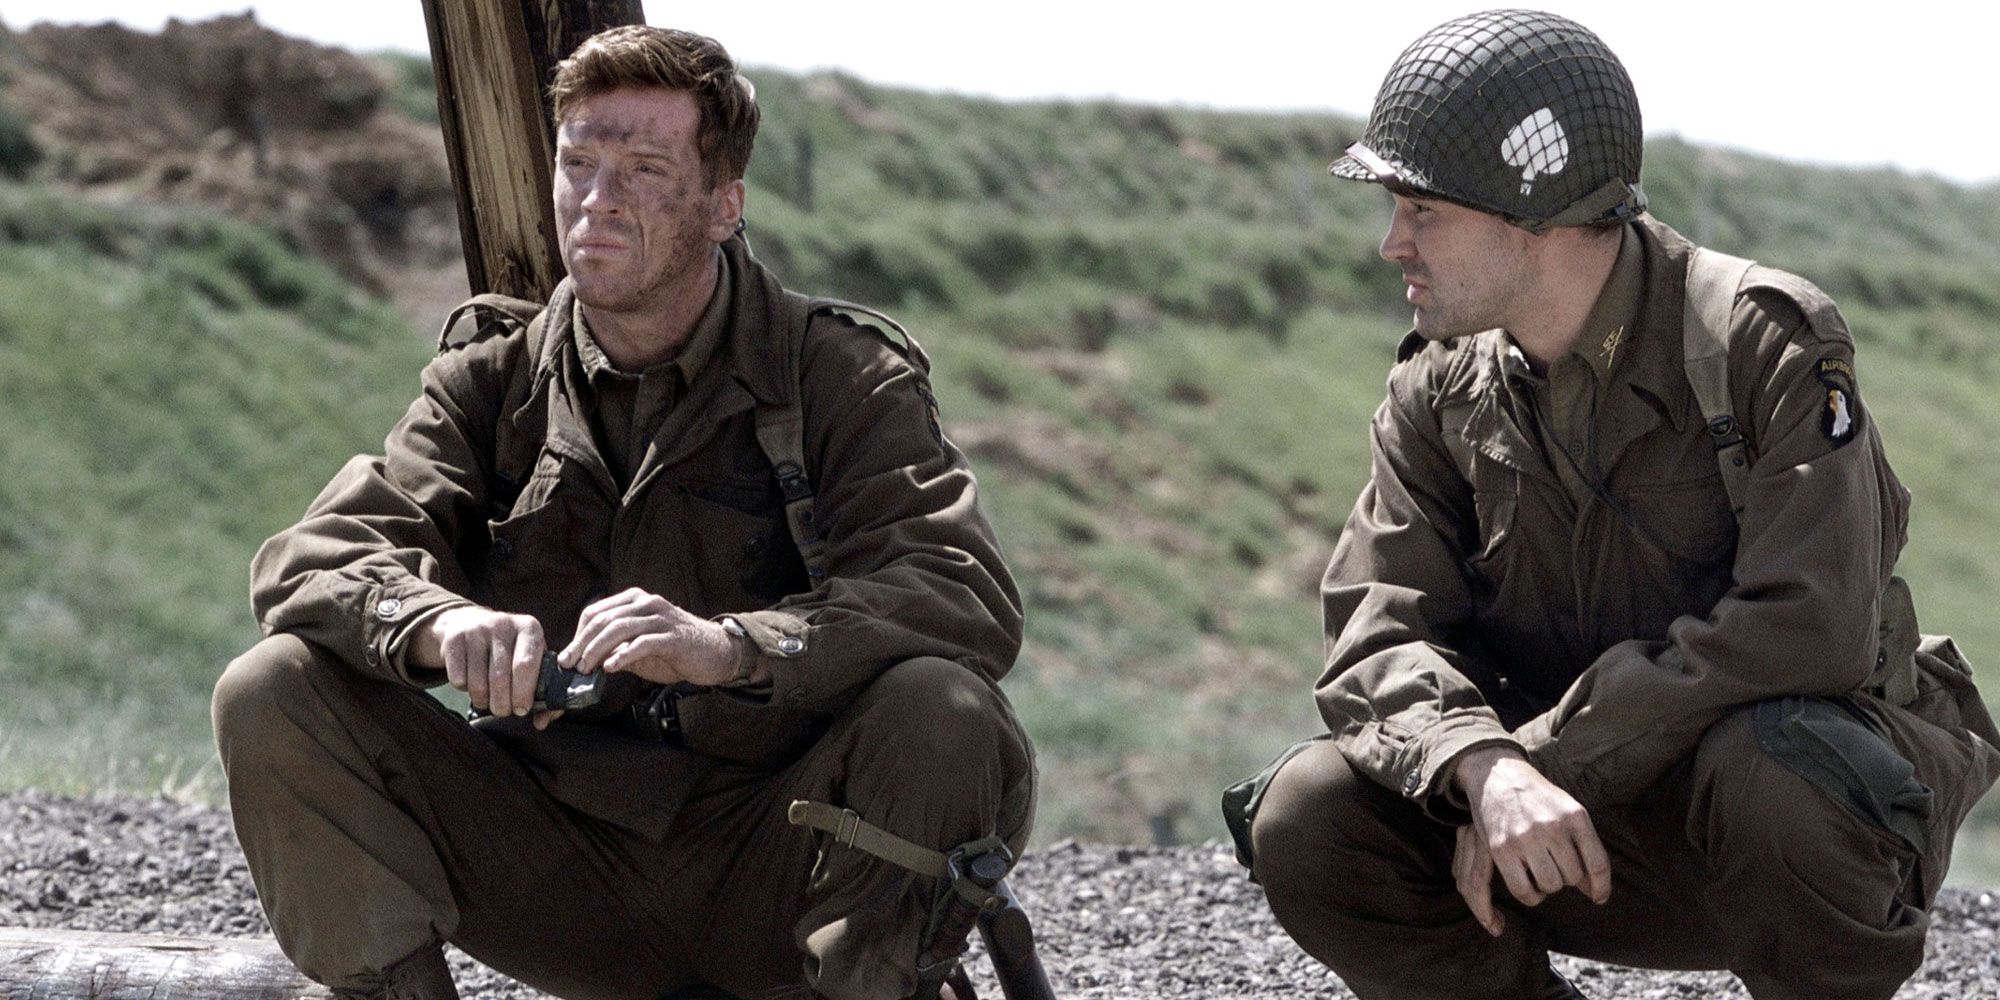 Two soldiers have a conversation while squatting in Band of Brothers.